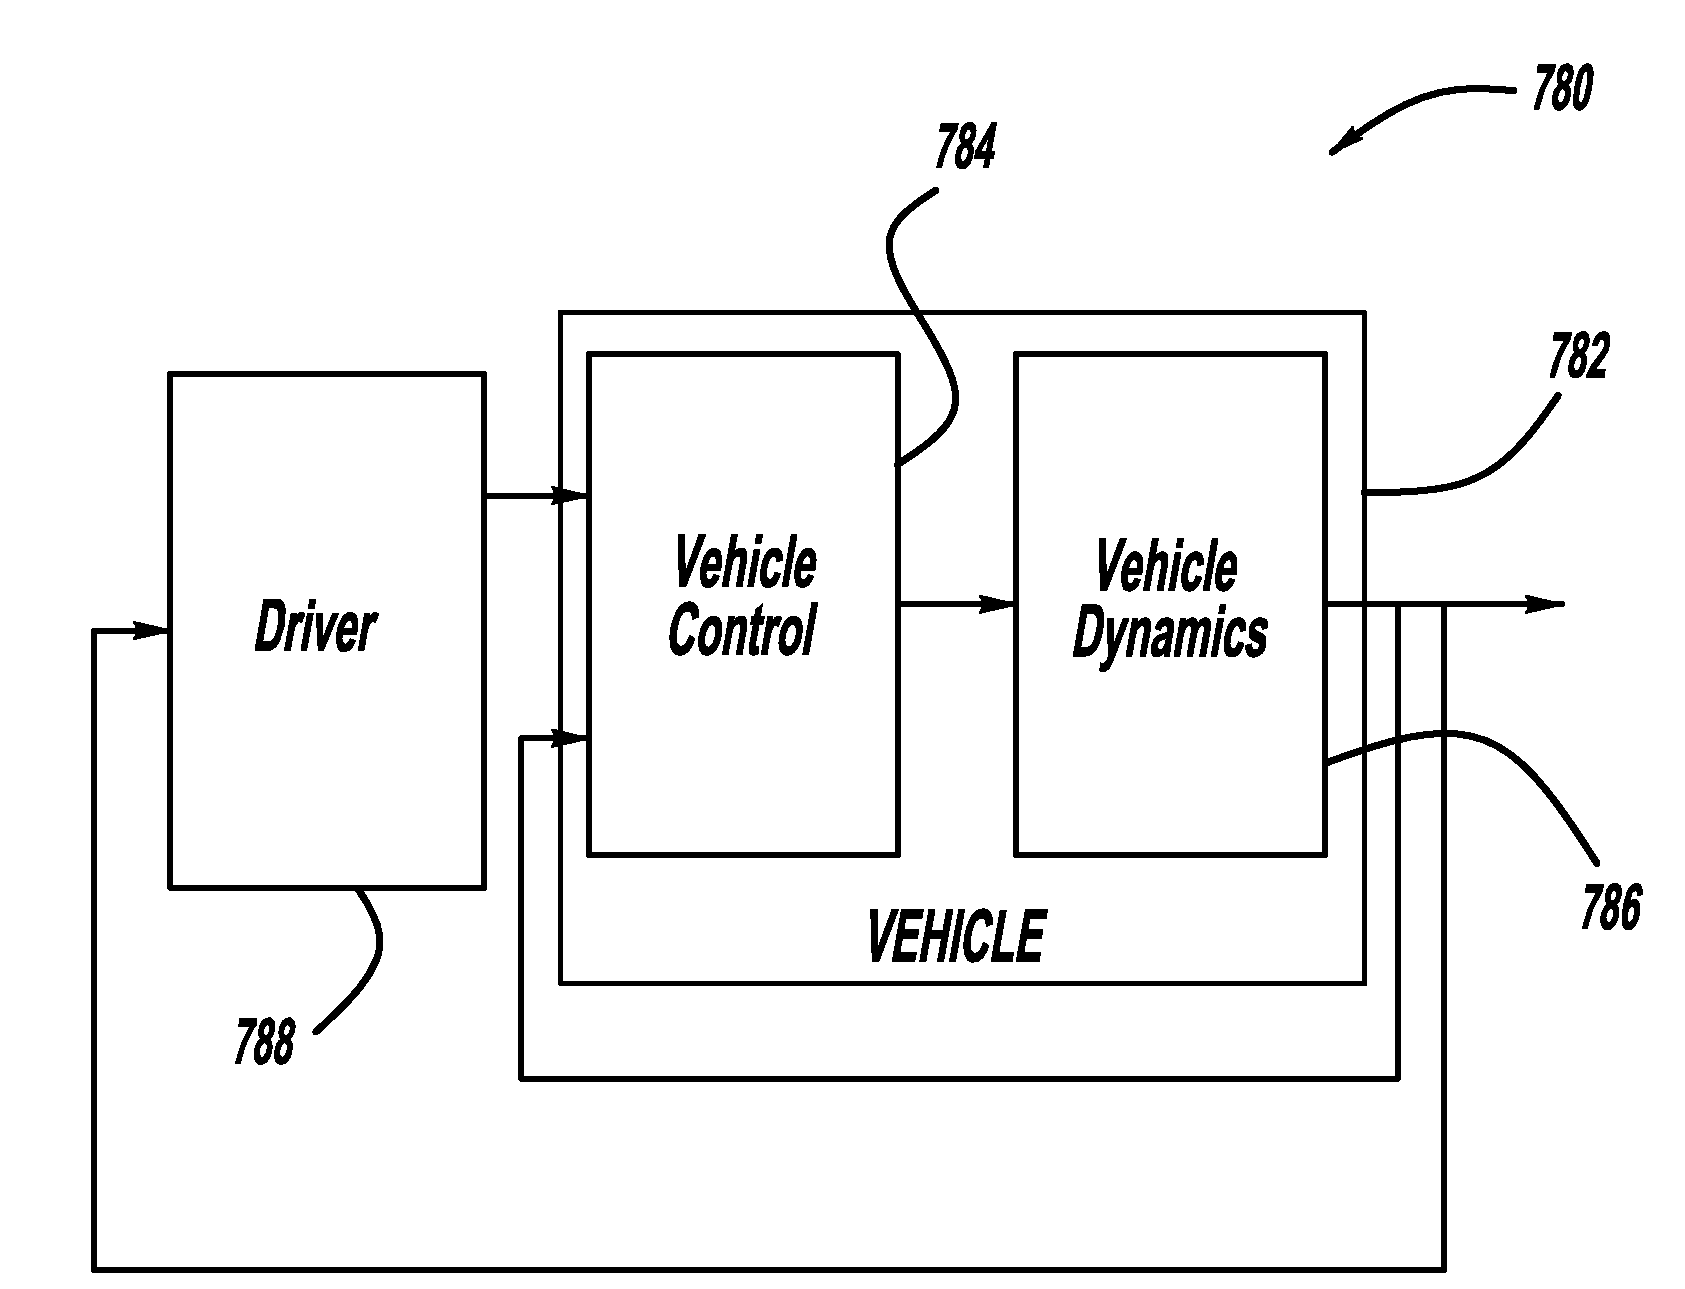 Vehicle stability enhancement control adaptation to driving skill based on passing maneuver